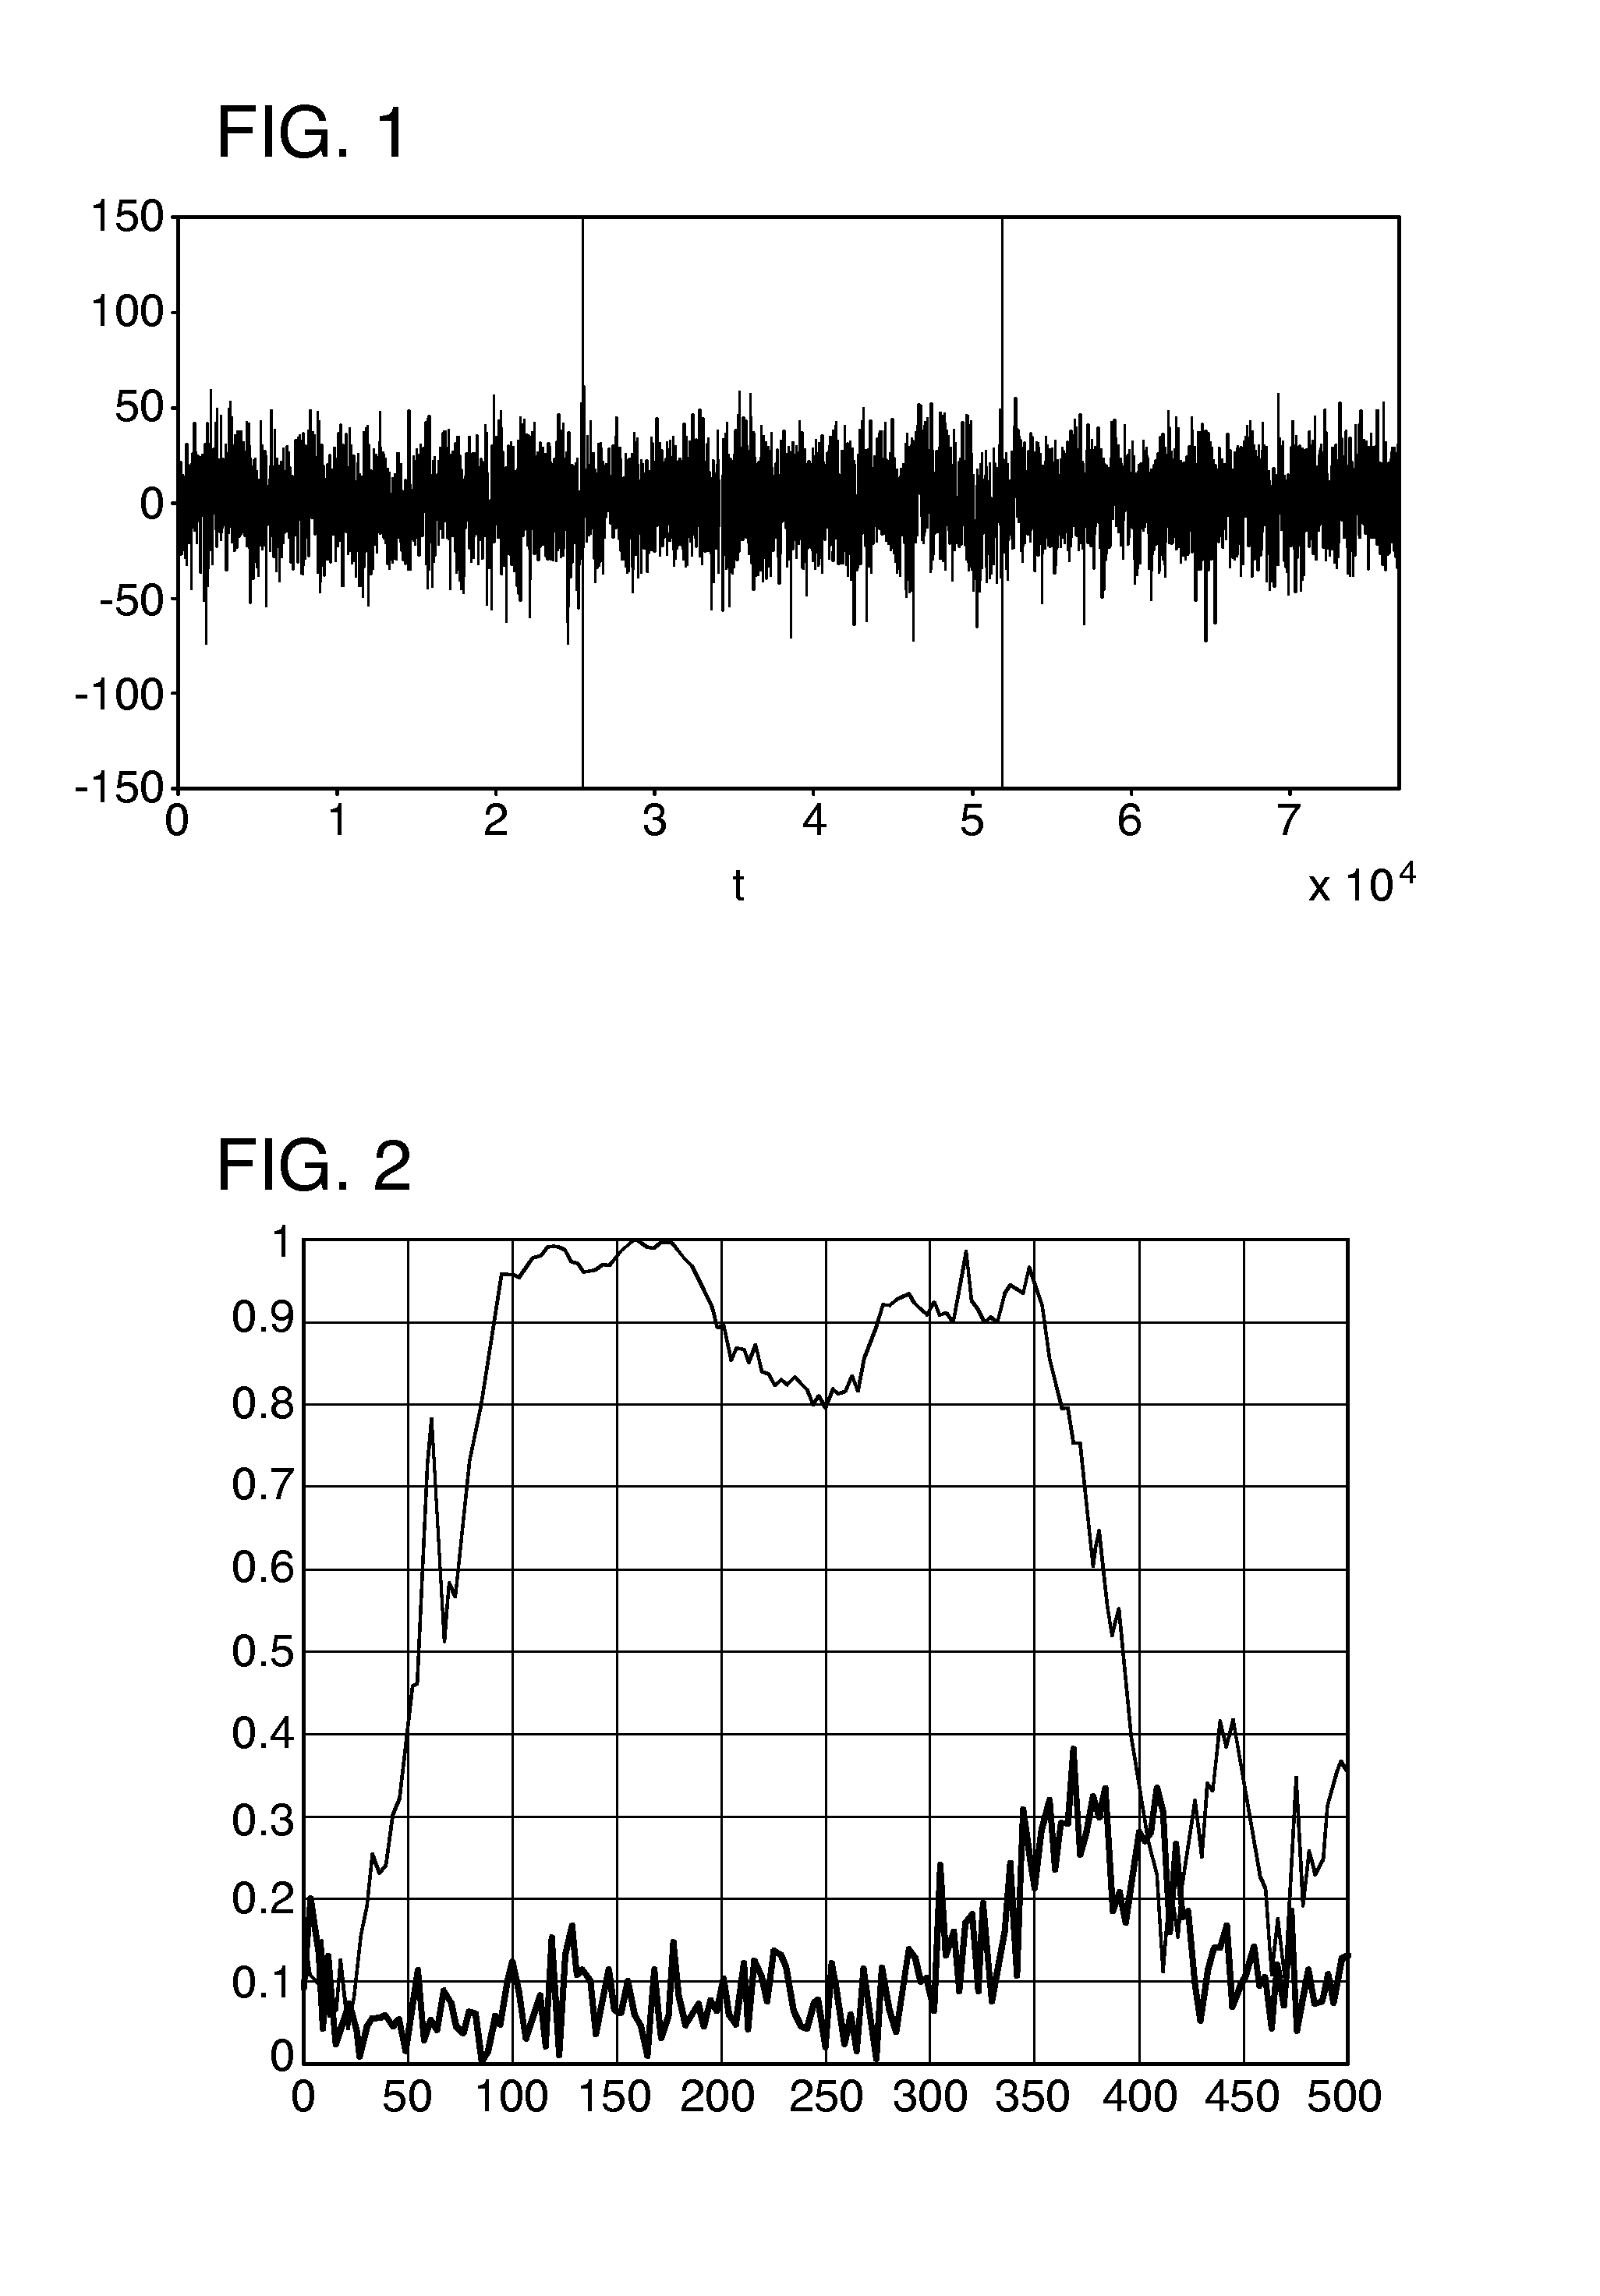 Flame monitoring of a gas turbine combustor using a characteristic spectral pattern from a dynamic pressure sensor in the combustor